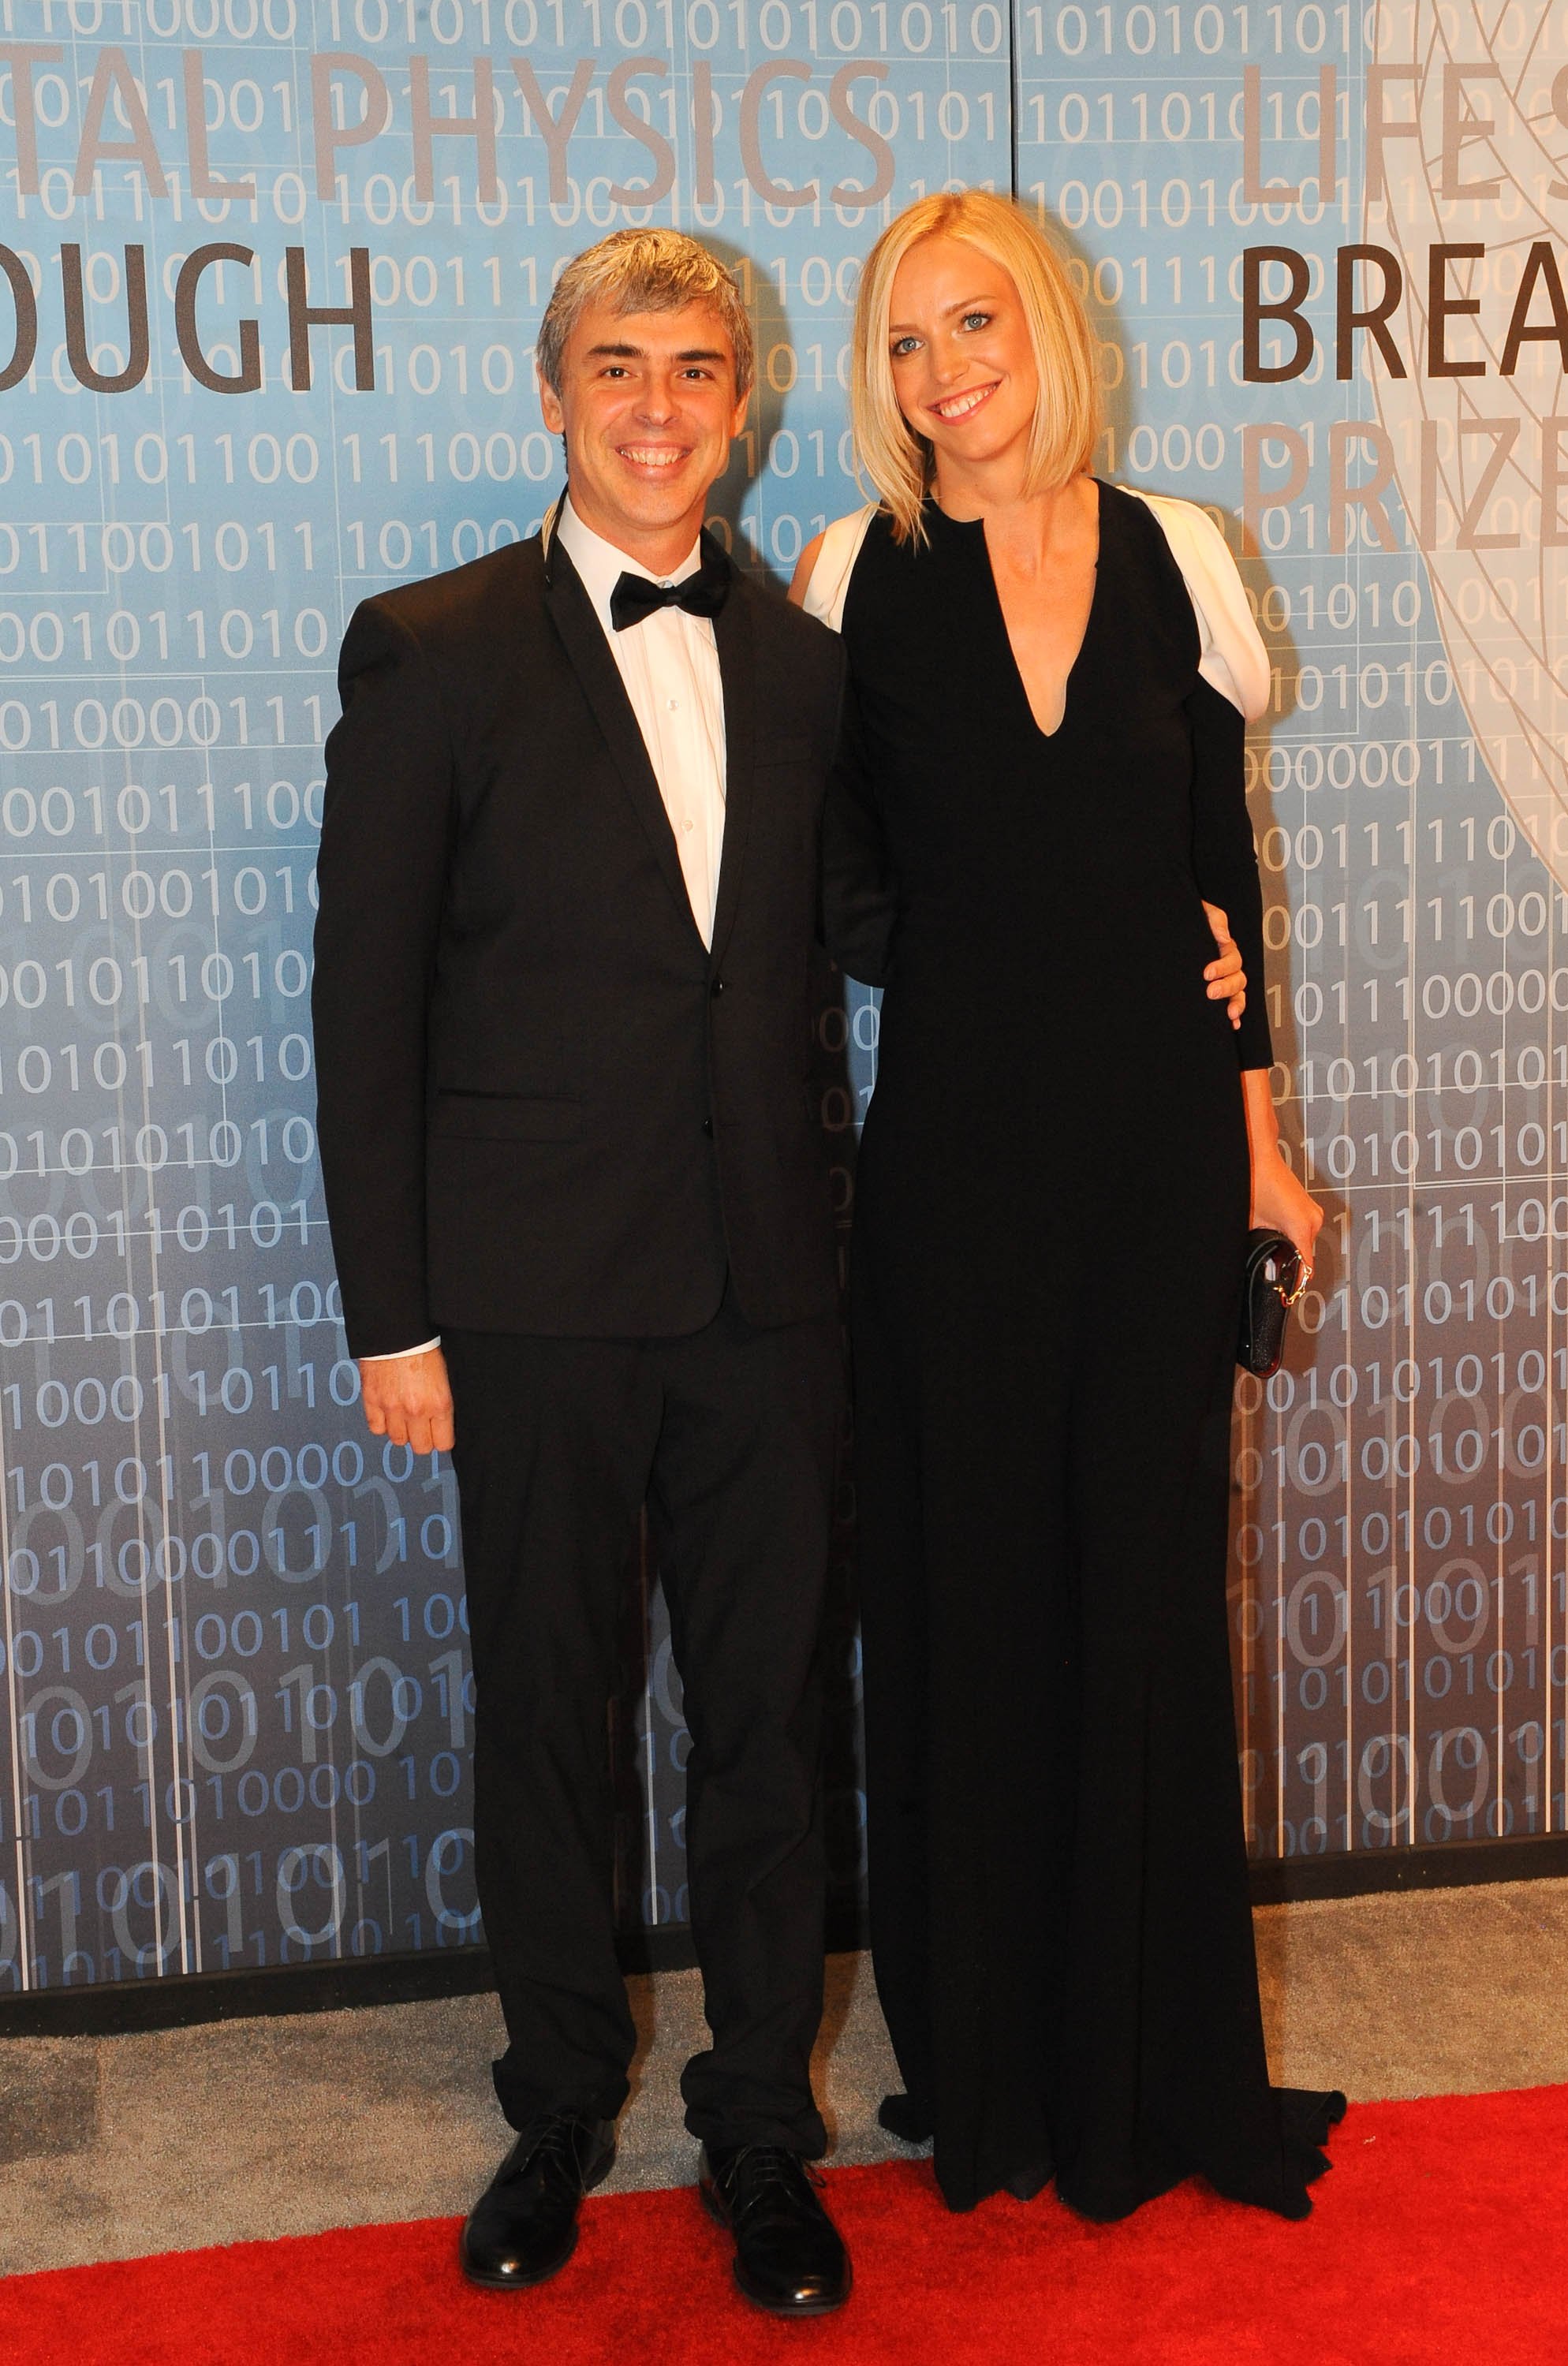 Larry Page and Lucinda Southworth at the Breakthrough Prize Inaugural Ceremony on December 12, 2013, in California | Source: Getty Images